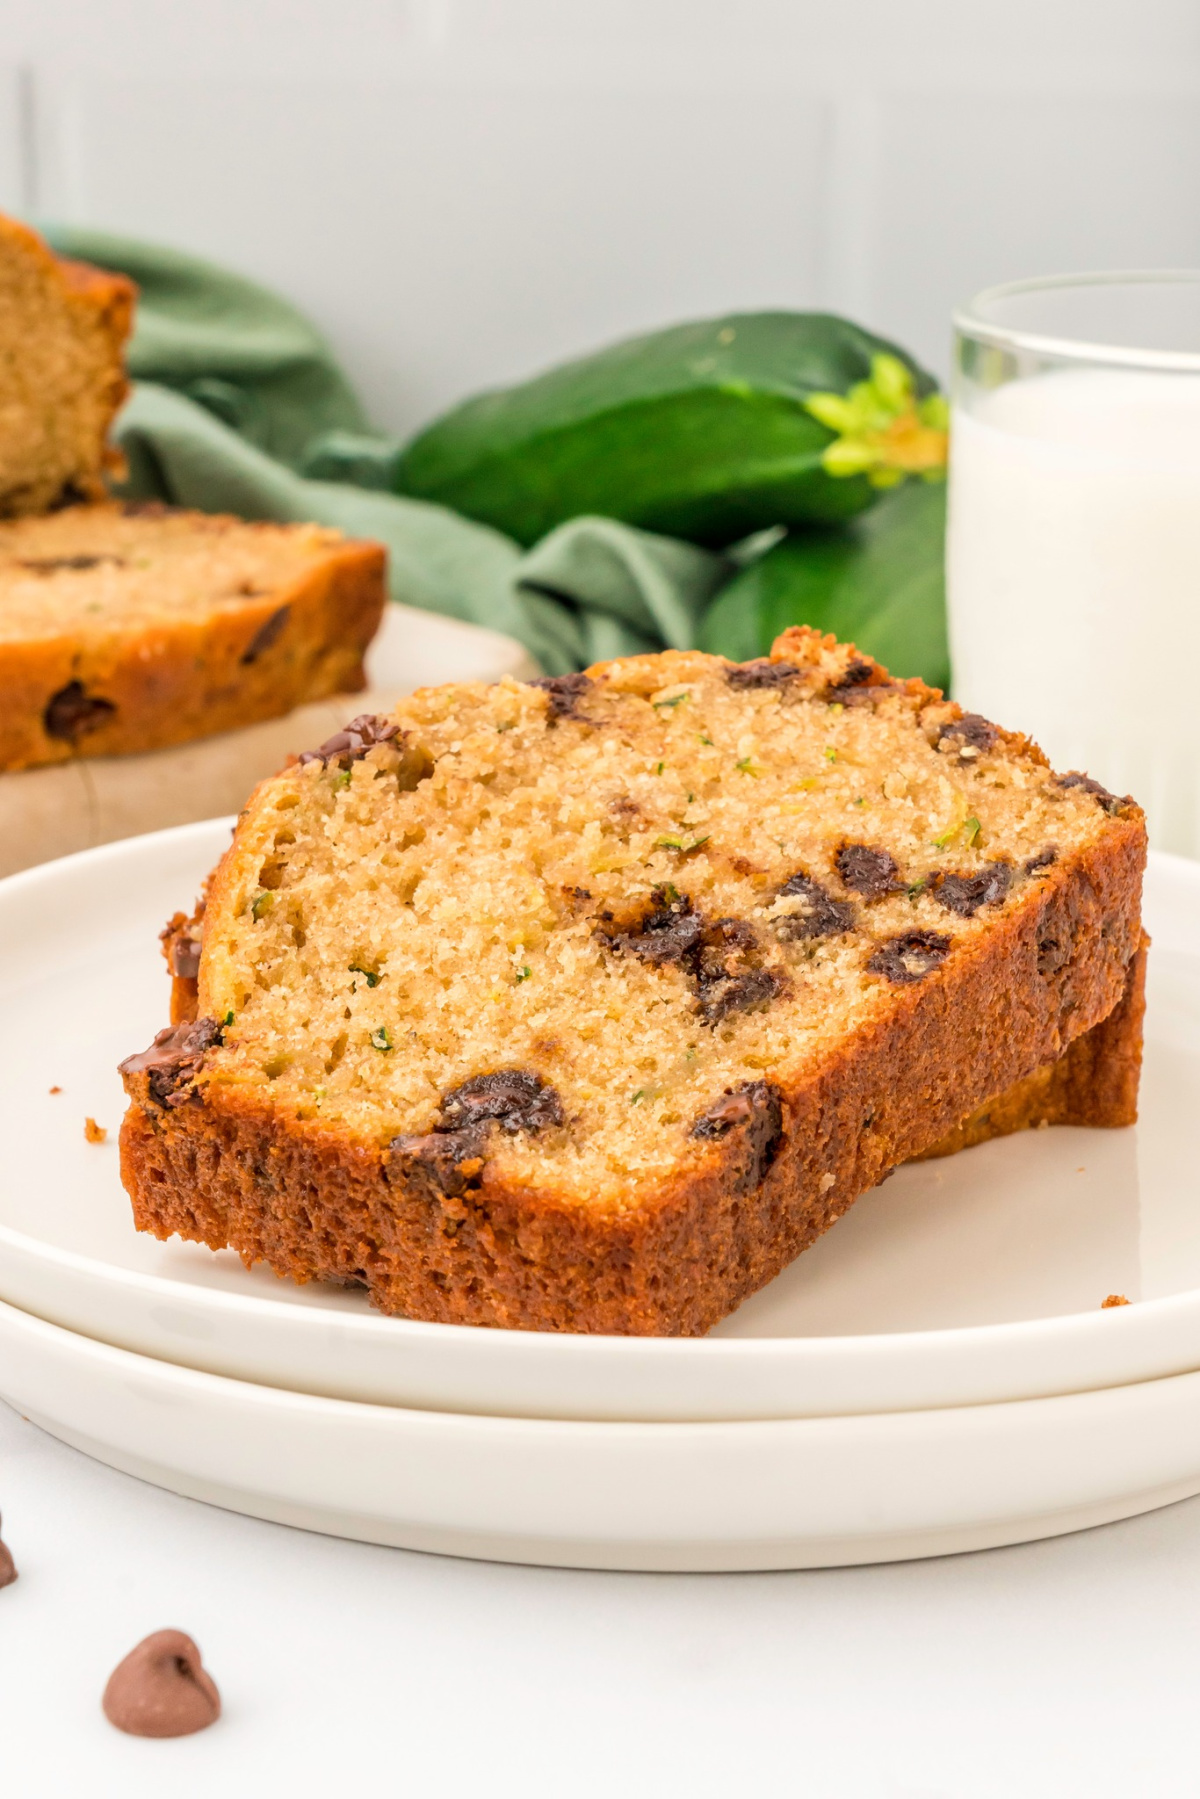 A much healthier version of chocolate chip zucchini bread that is much lower in calories and fat